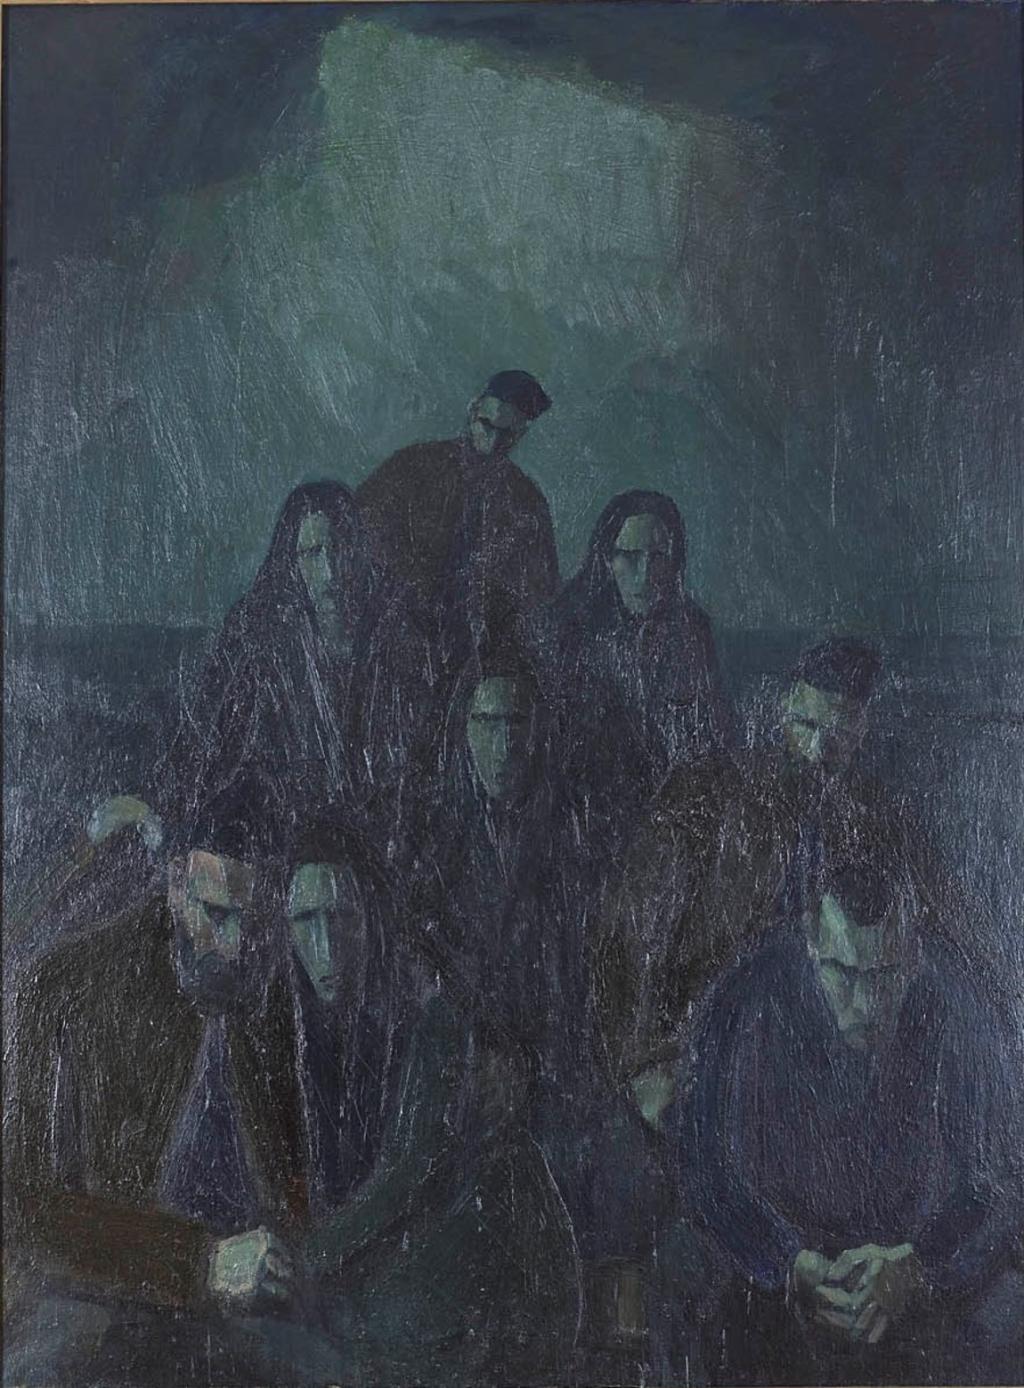 The Funeral, artwork by Mikines displayed at the National Gallery in the Faroe Islands. 